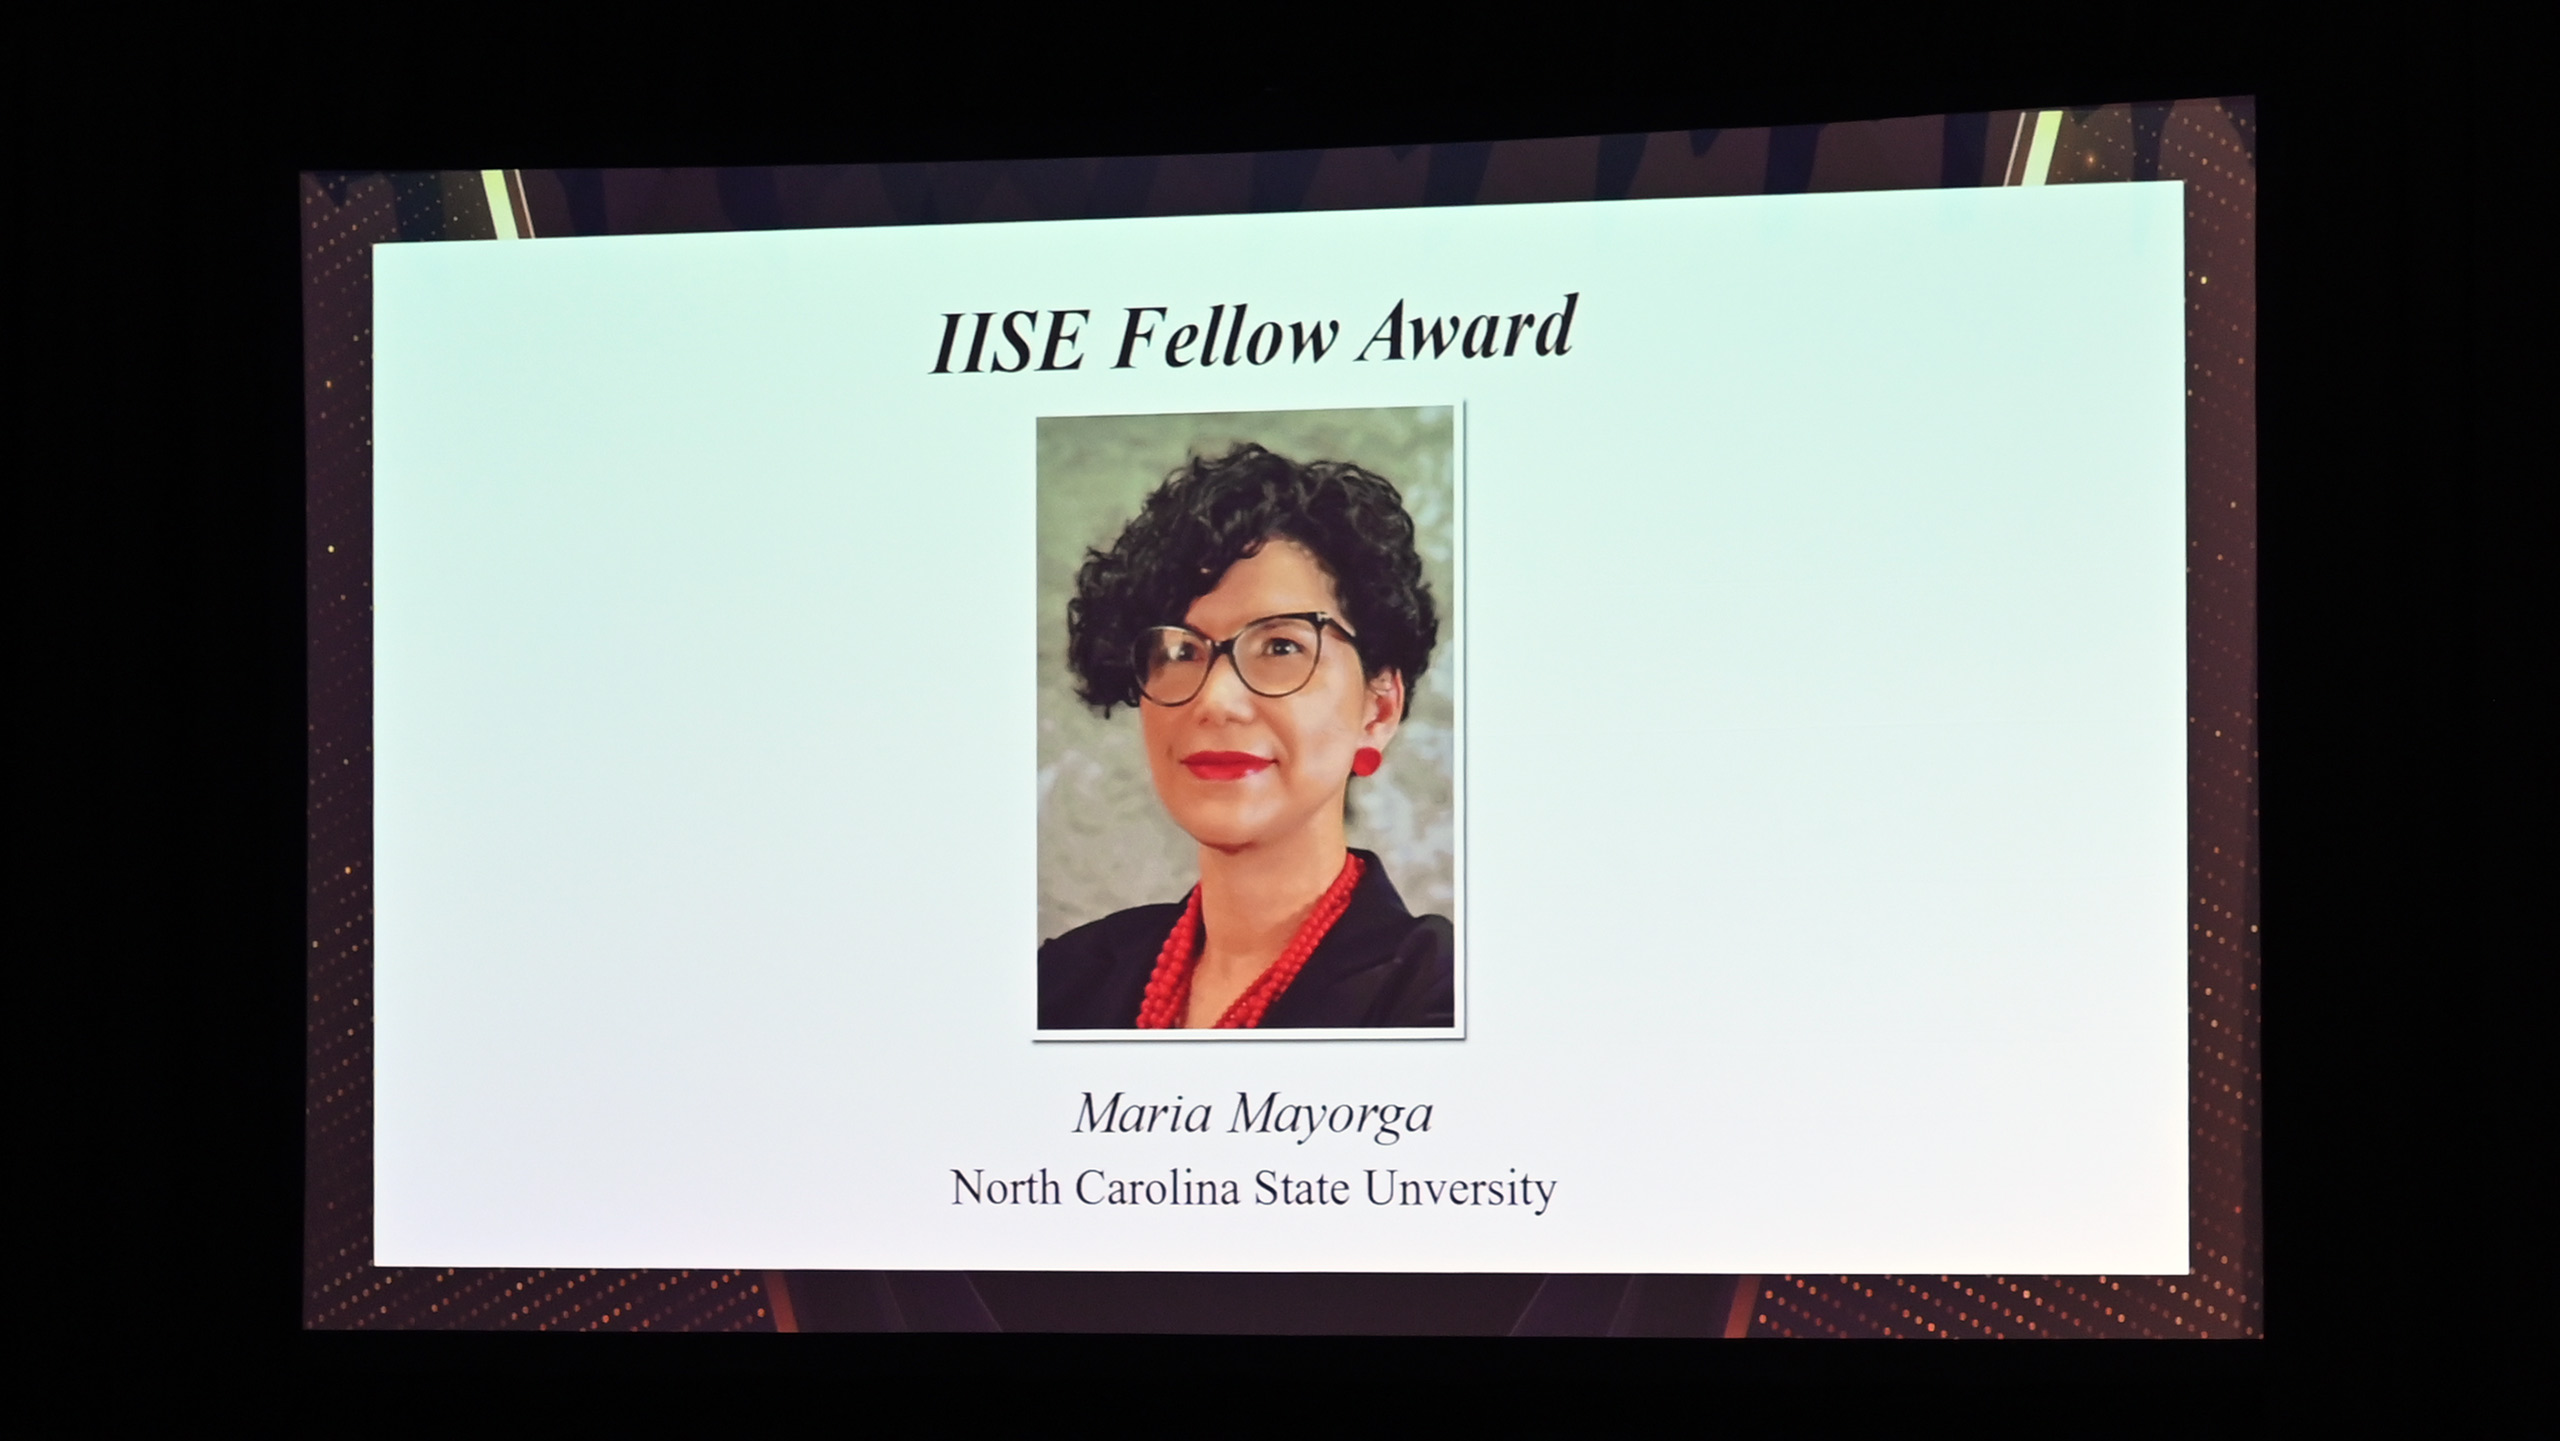 Maria Mayorga wins an IISE Fellows Award for her work in industrial and systems engineering